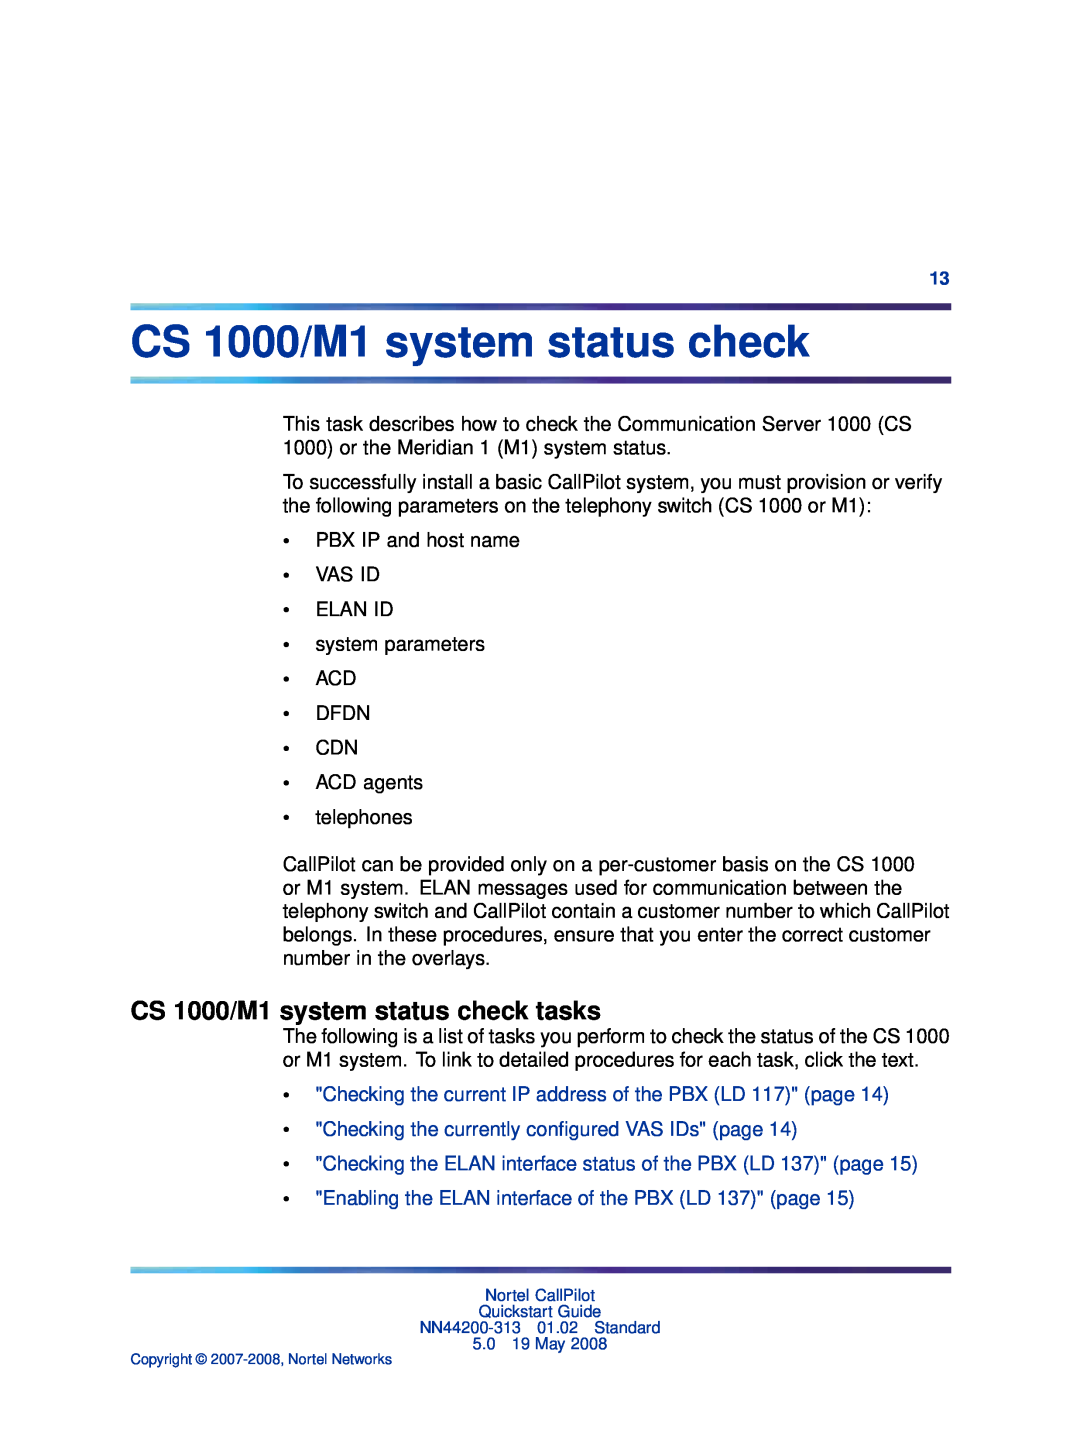 Nortel Networks NN44200-313 CS 1000/M1 system status check tasks, Checking the currently conﬁgured VAS IDs page 